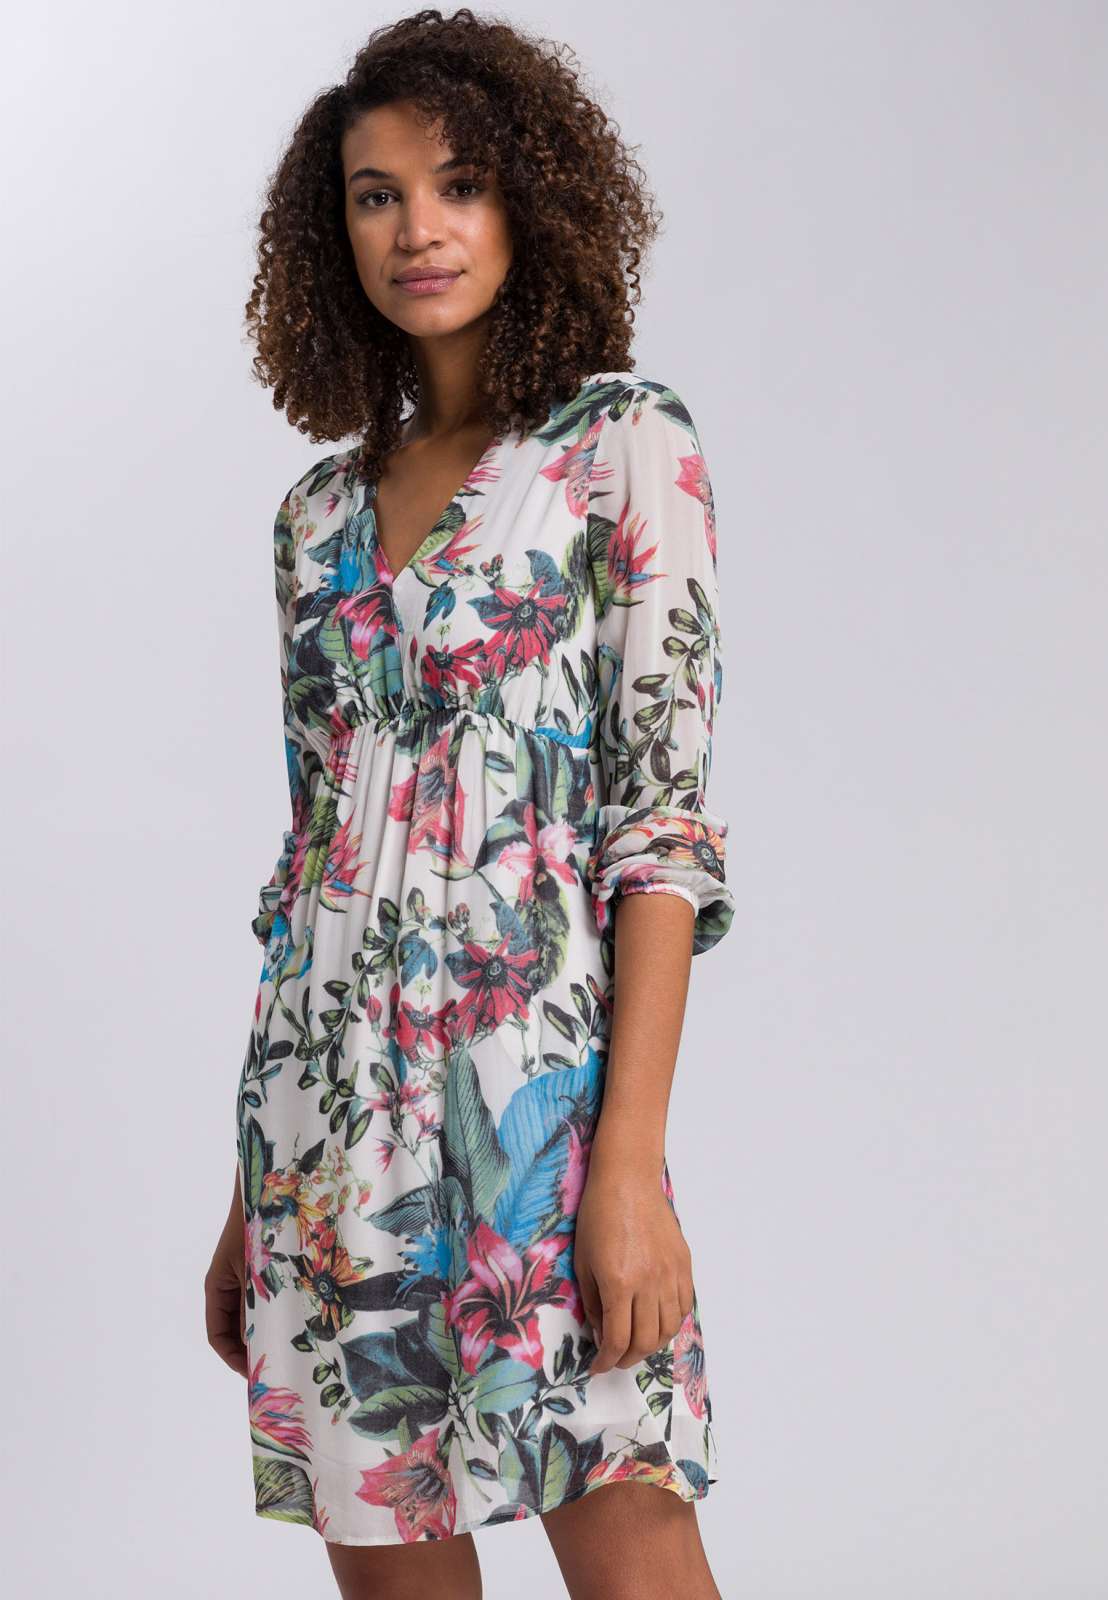 With all the hype about floral patterns, mix it up a bit. Instead of floral  tops and dresses, flor…